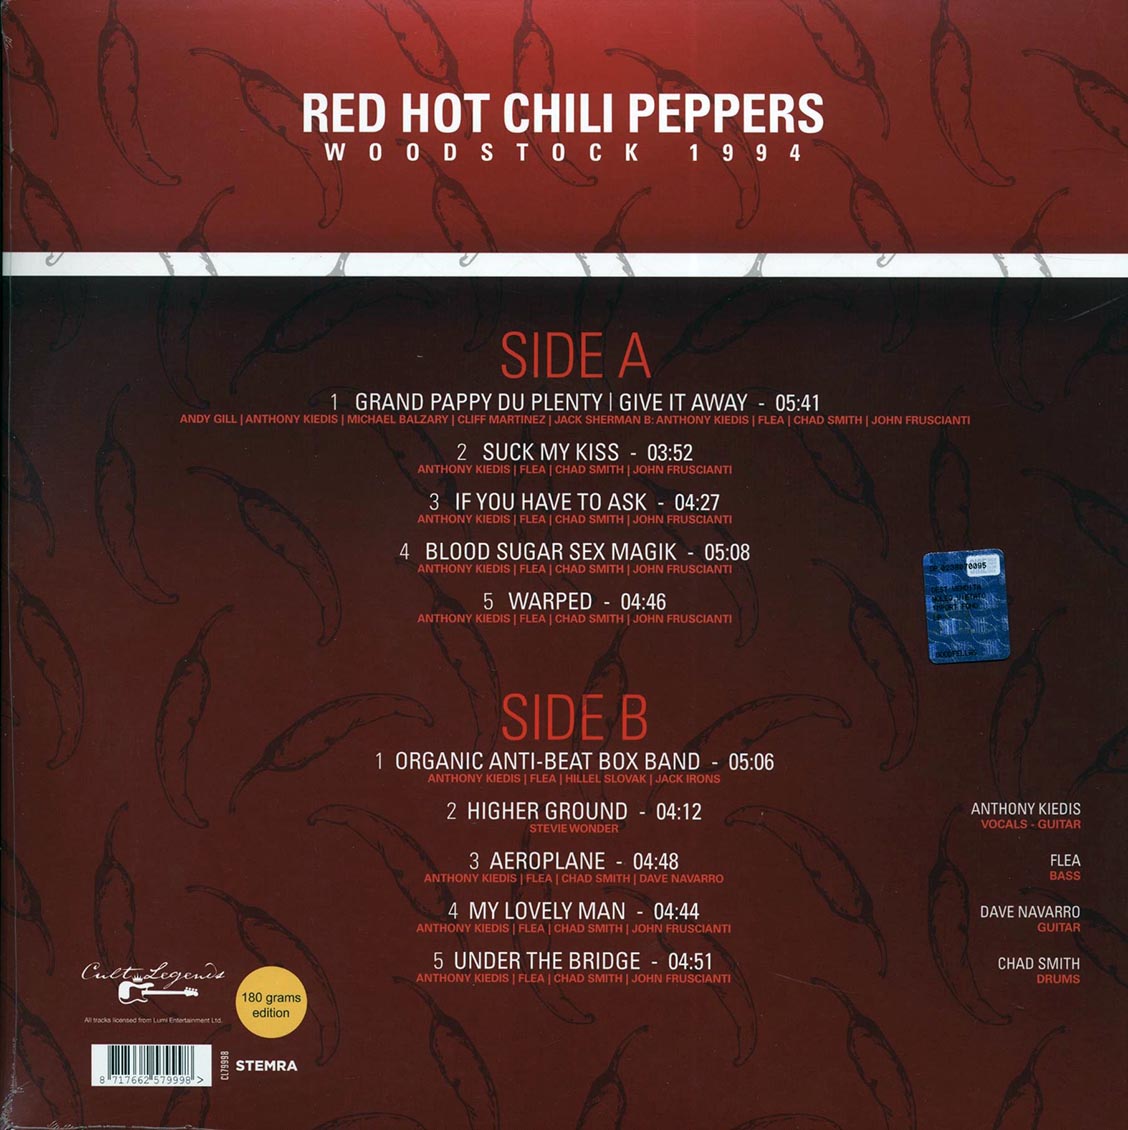 Red Hot Chili Peppers - Best Of Woodstock 1994: The Winston Farm, Saugerties, NY, August 14th - Vinyl LP, LP